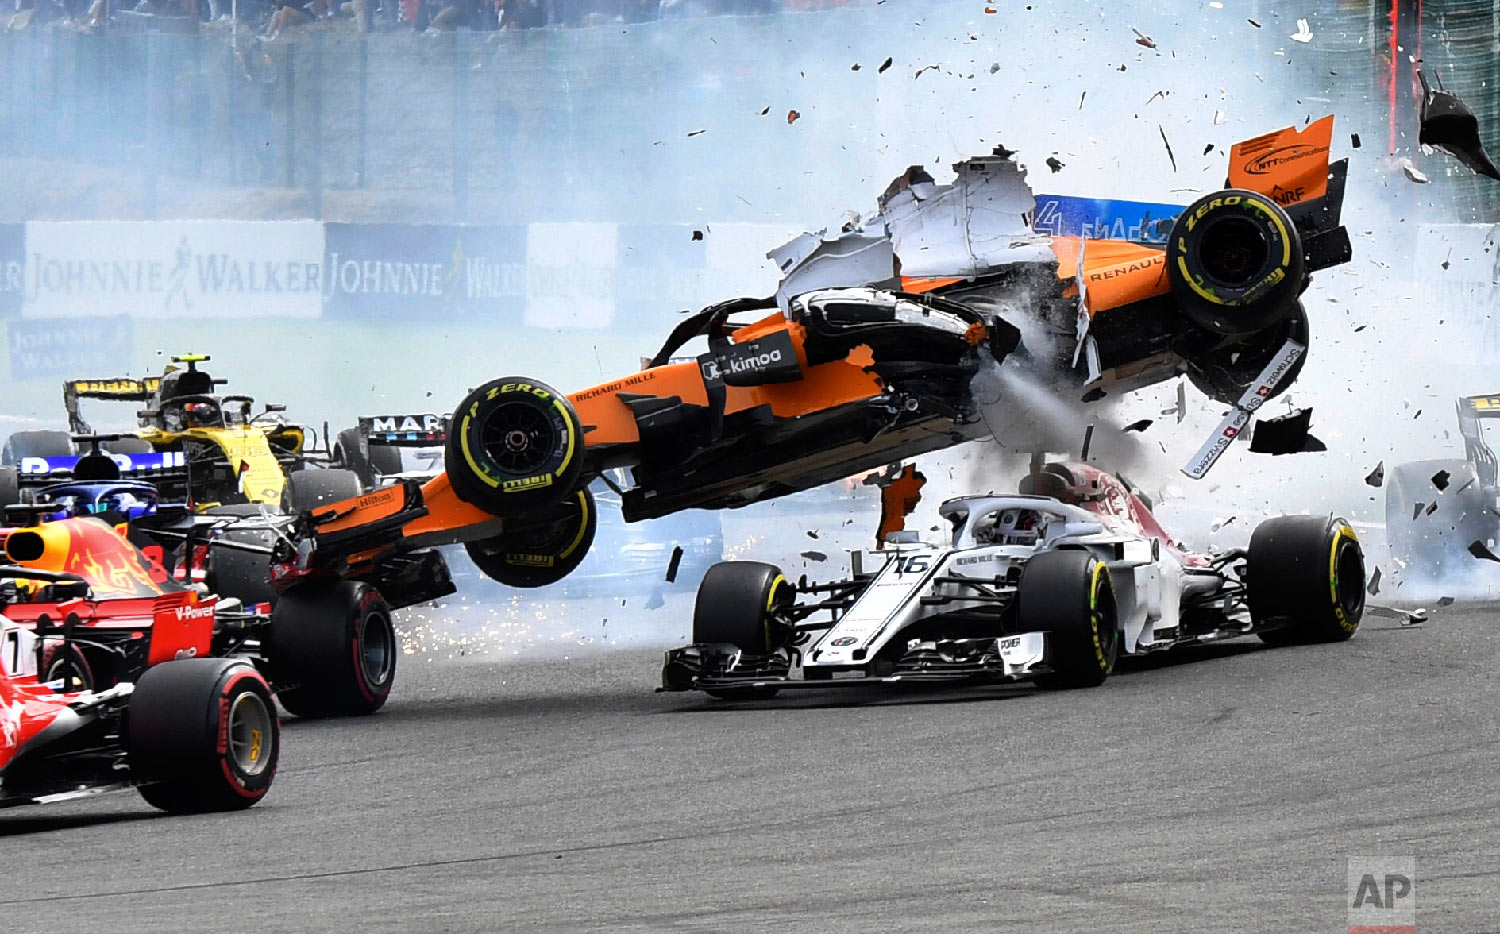  Mclaren driver Fernando Alonso of Spain goes over the top of Sauber driver Charles Leclerc of Monaco at the start of the Belgian Formula One Grand Prix in Spa-Francorchamps, Belgium, on Aug. 26, 2018. (AP Photo/Geert Vanden Wijngaert) 